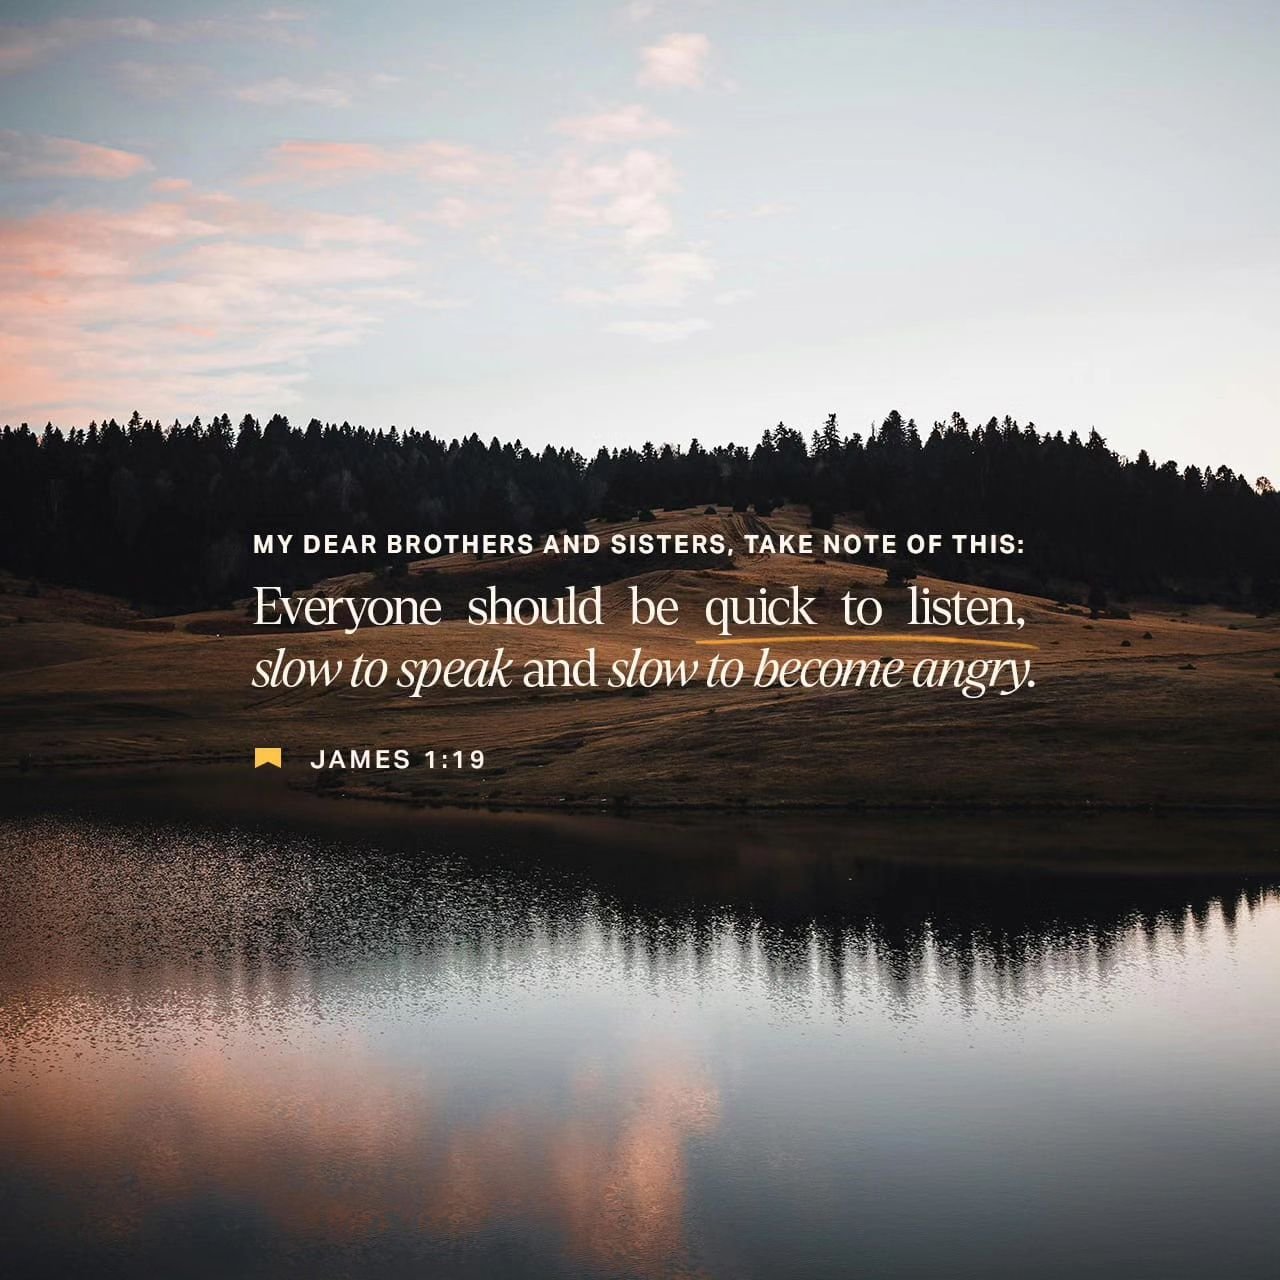 ‭‭James 1:19-21 ESV‬‬

[19]  Know this, my beloved brothers: let every person be quick to hear, slow to speak, slow to anger; [20] for the anger of man does not produce the righteousness of God. [21] Therefore put away all filthiness and rampant wic